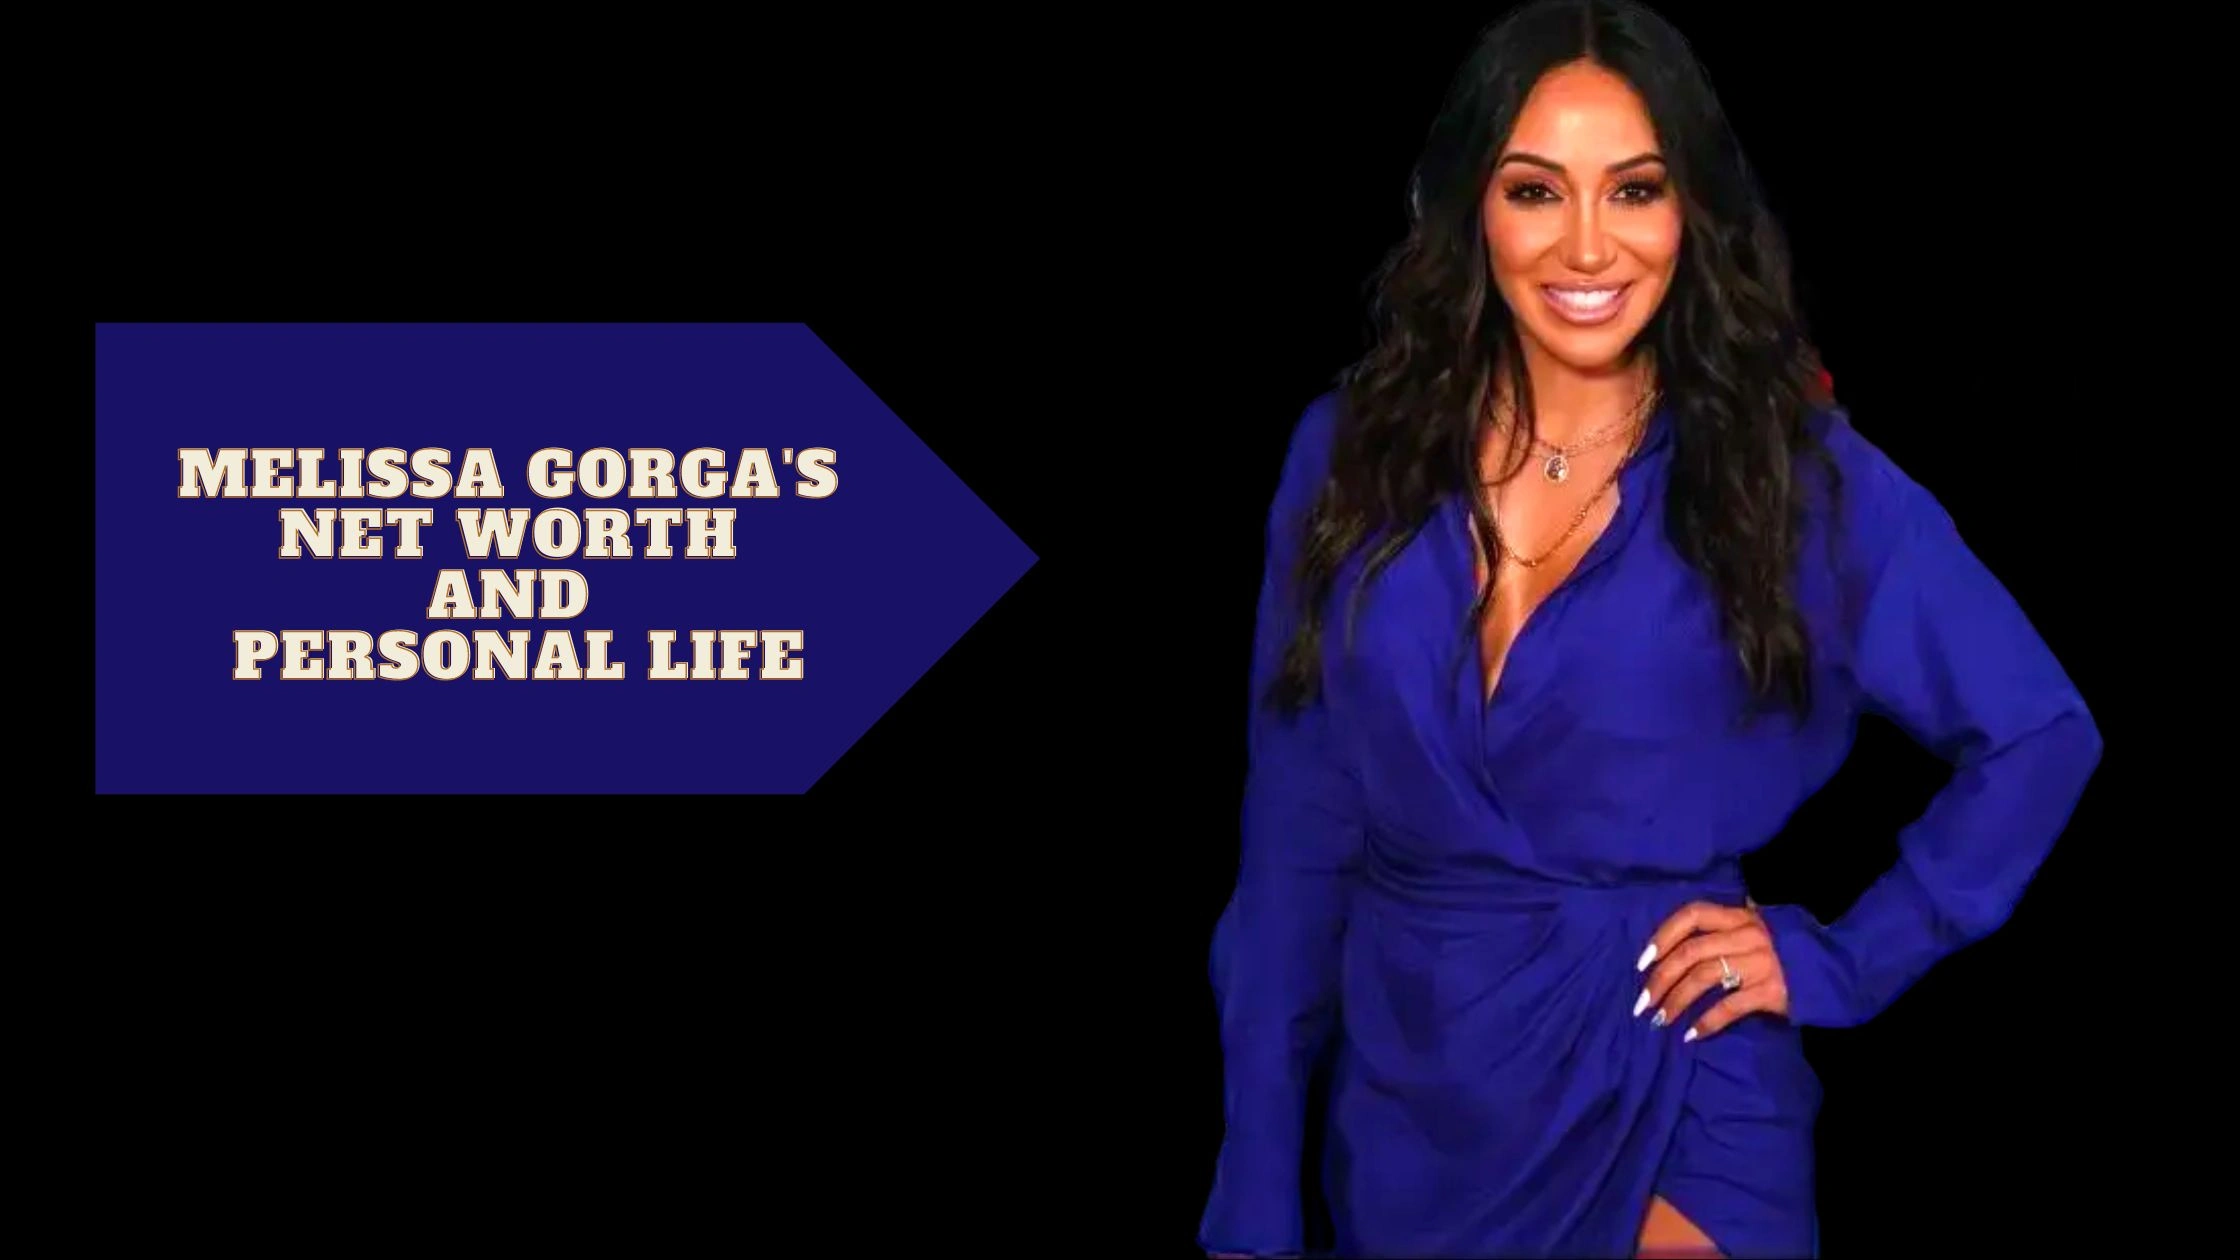 All About Melissa Gorga Net Worth, Wedding, Kids, And Personal Life